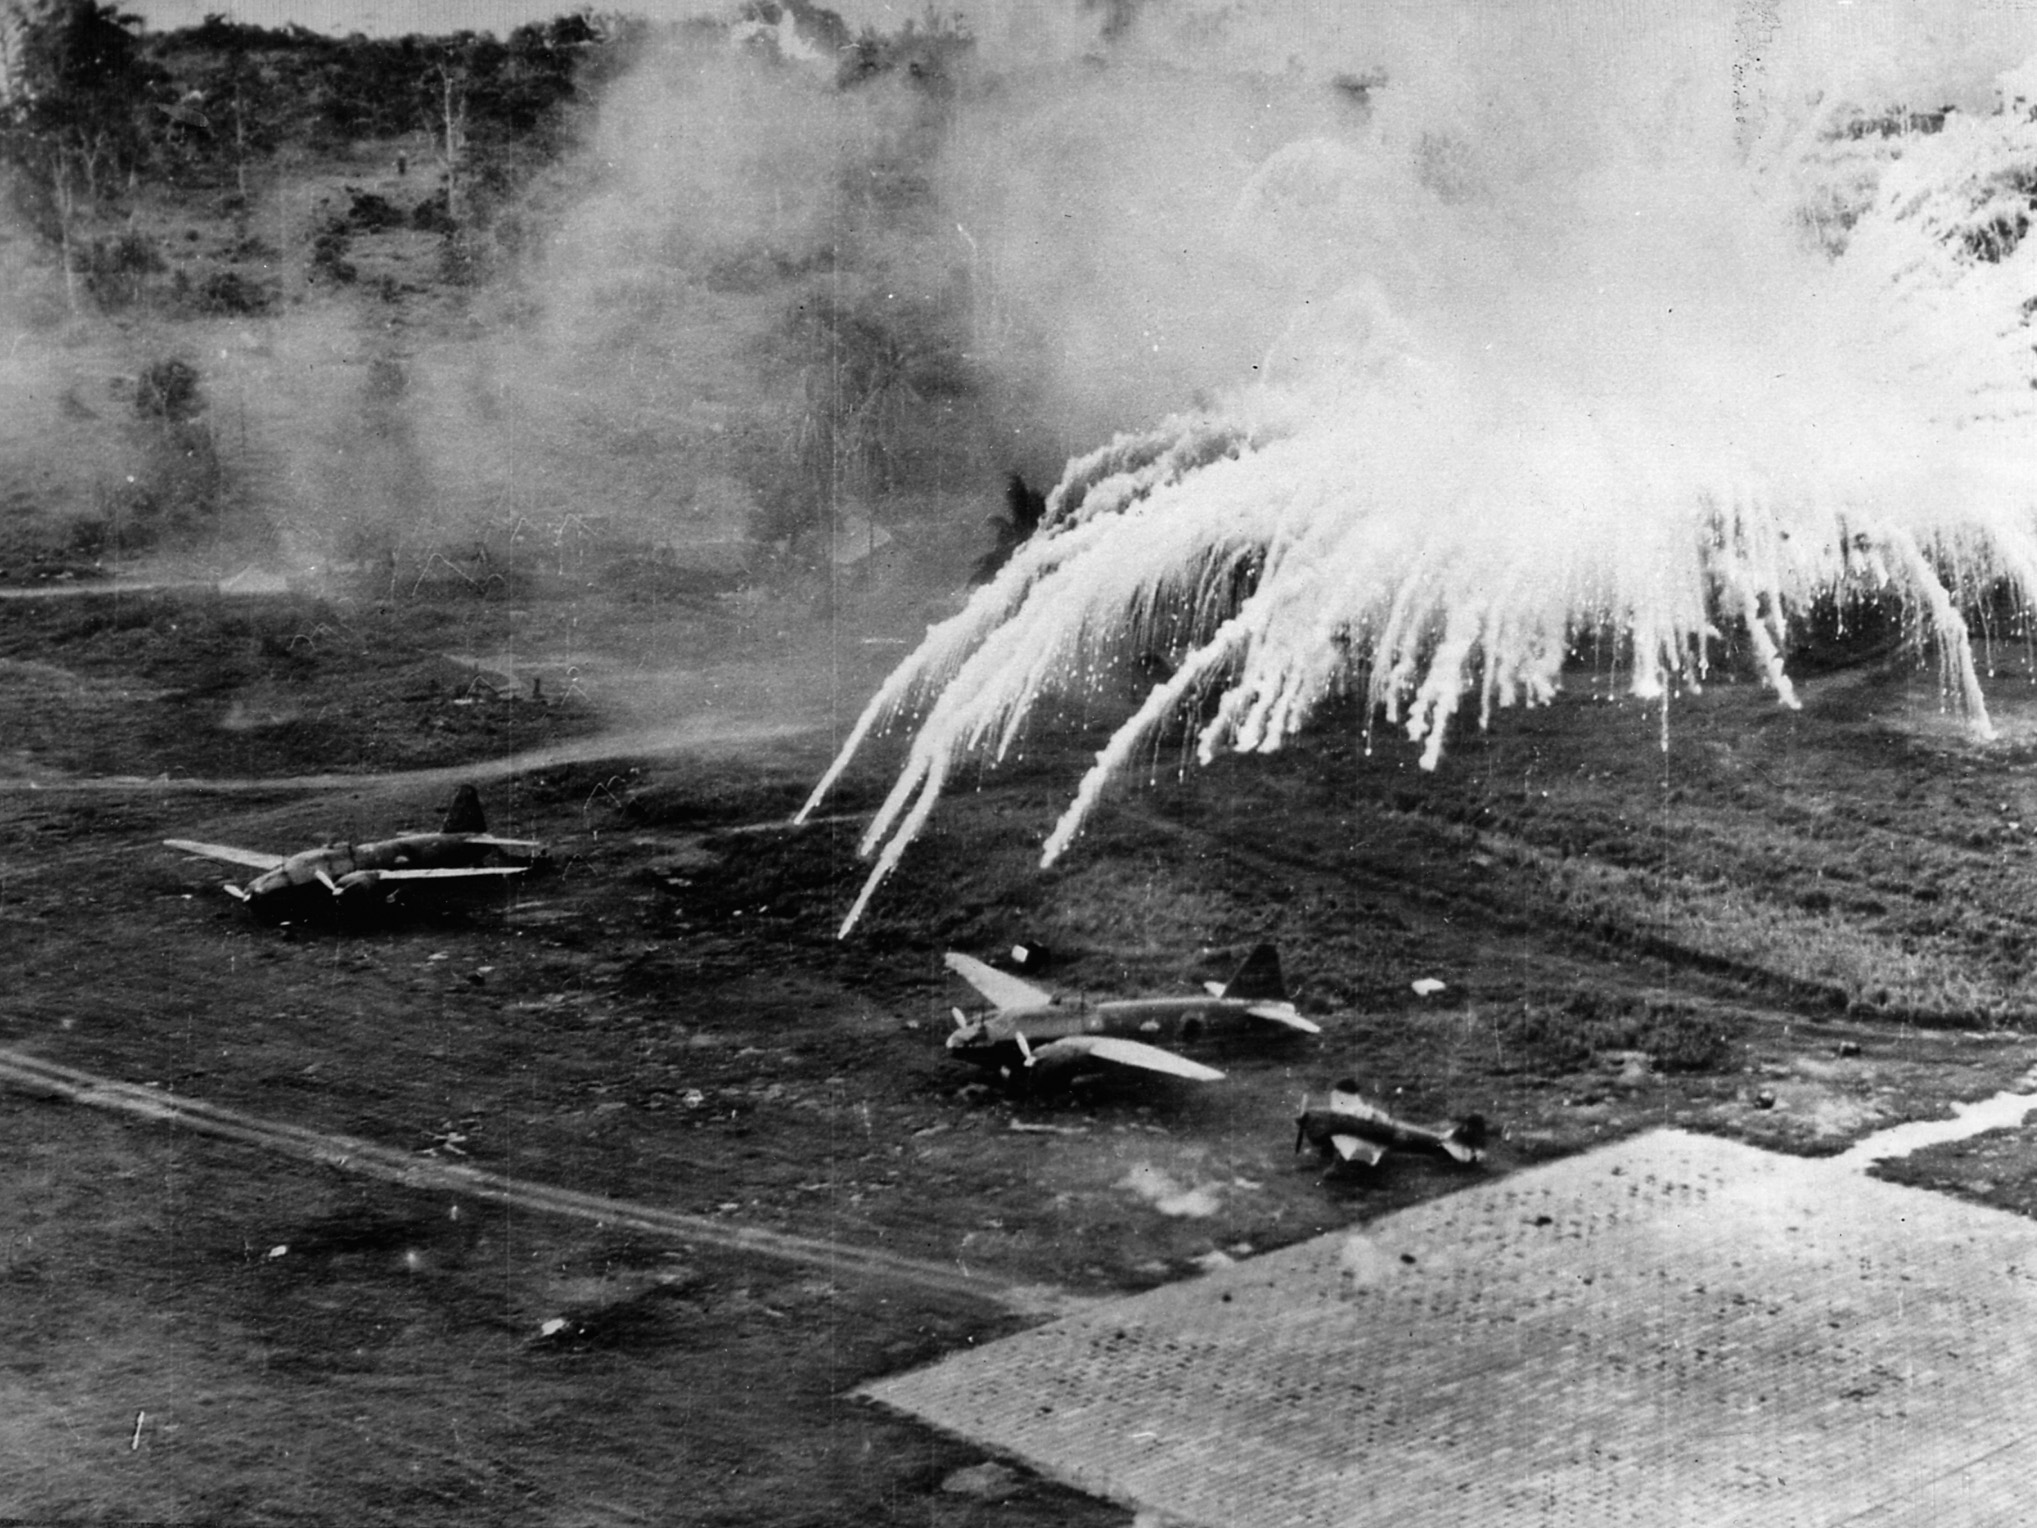 Explosions rock a Japanese airfield near Rabaul. U.S. B-25s and P-38s of the 5th Air Force hammered the site in an effort to put the airfield out of commission.